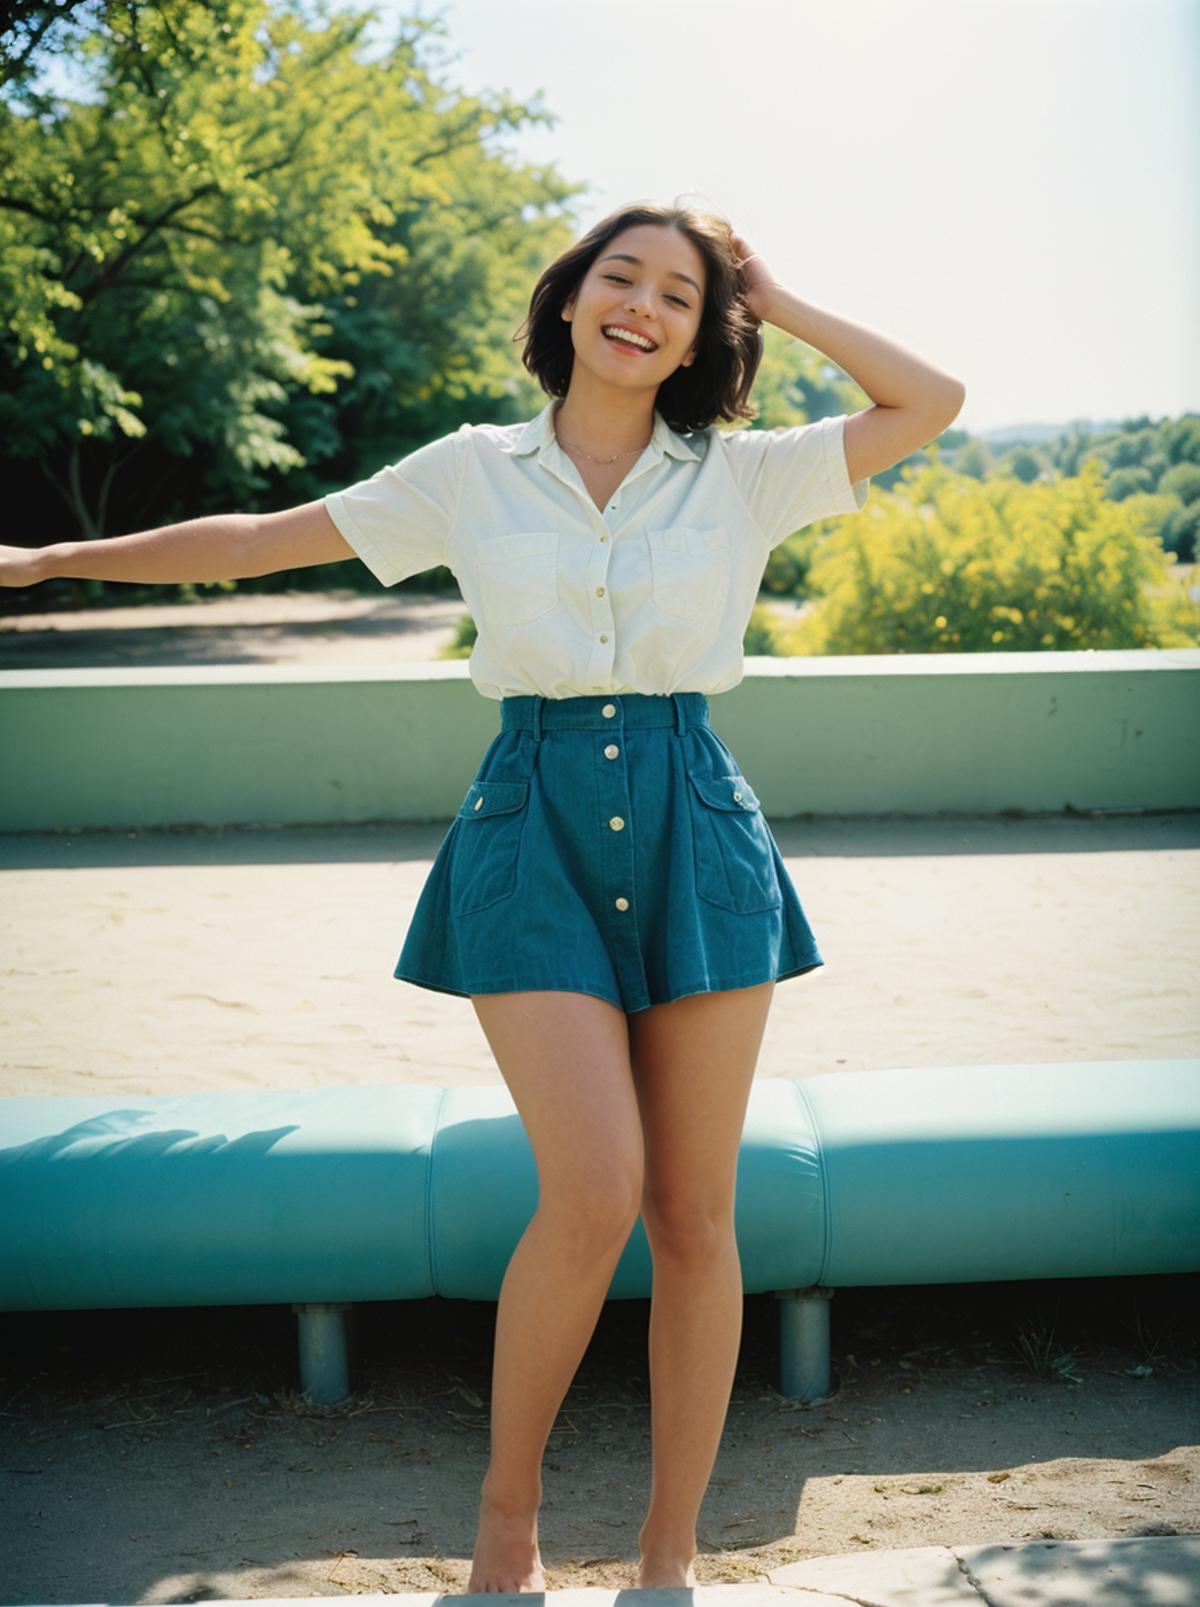 A young woman wearing a white shirt and blue shorts poses for the camera.